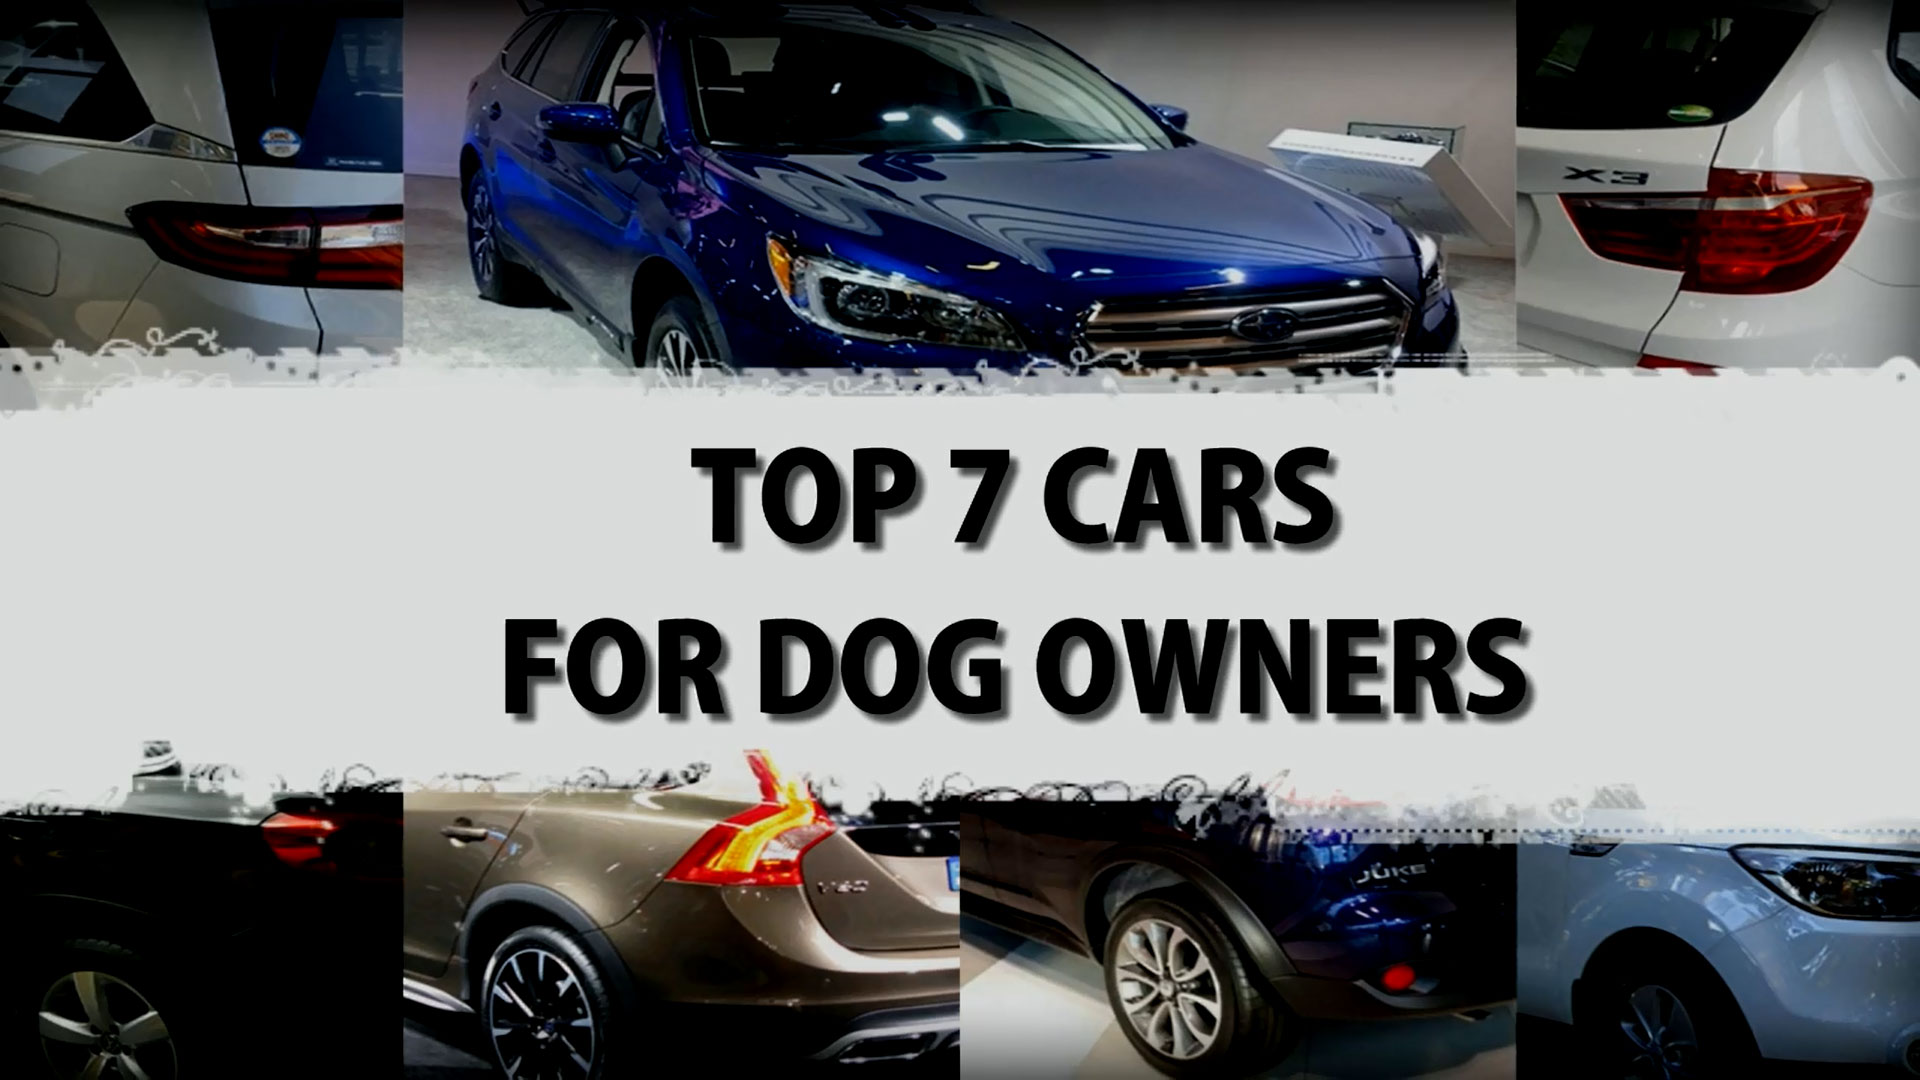 Top 7 Cars For Dog Owners